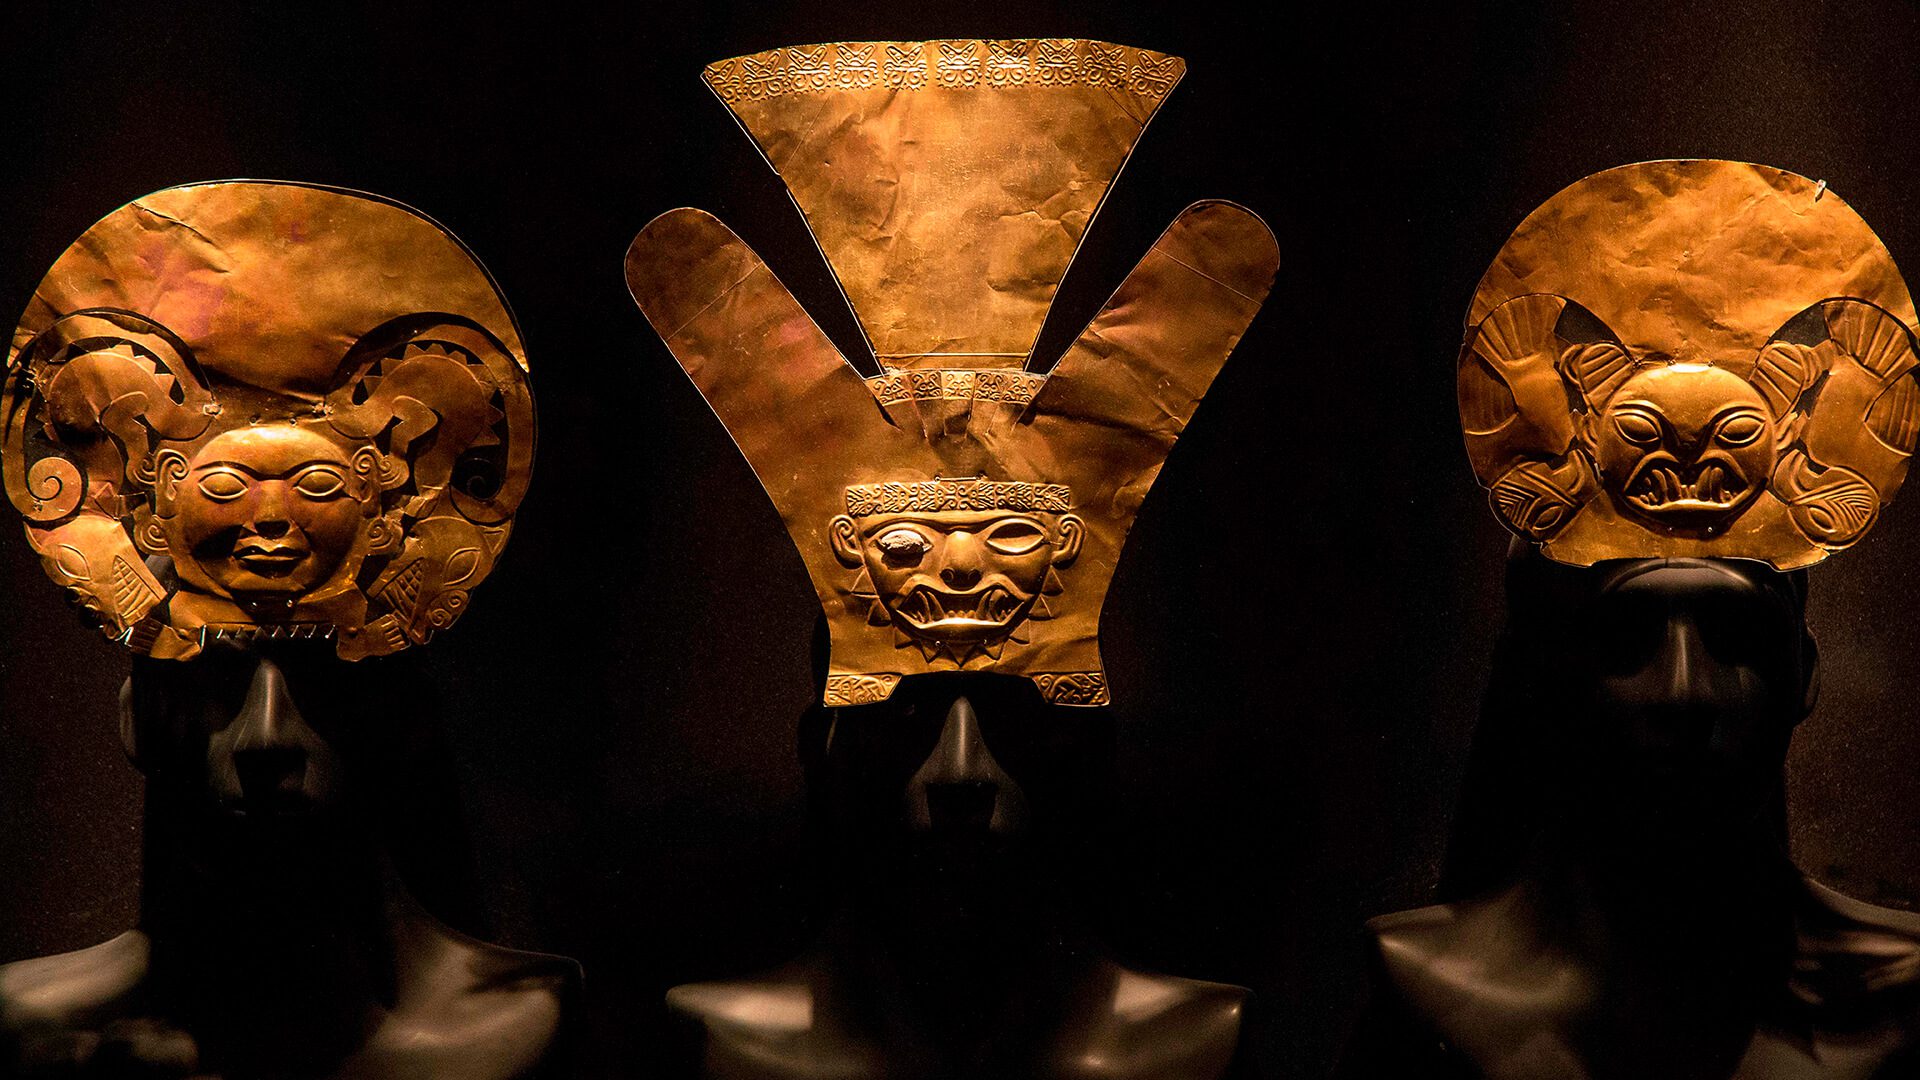 11Mochica gold head-ornaments in display at Museo Larco permanent collection | RESPONSible Travel Peru